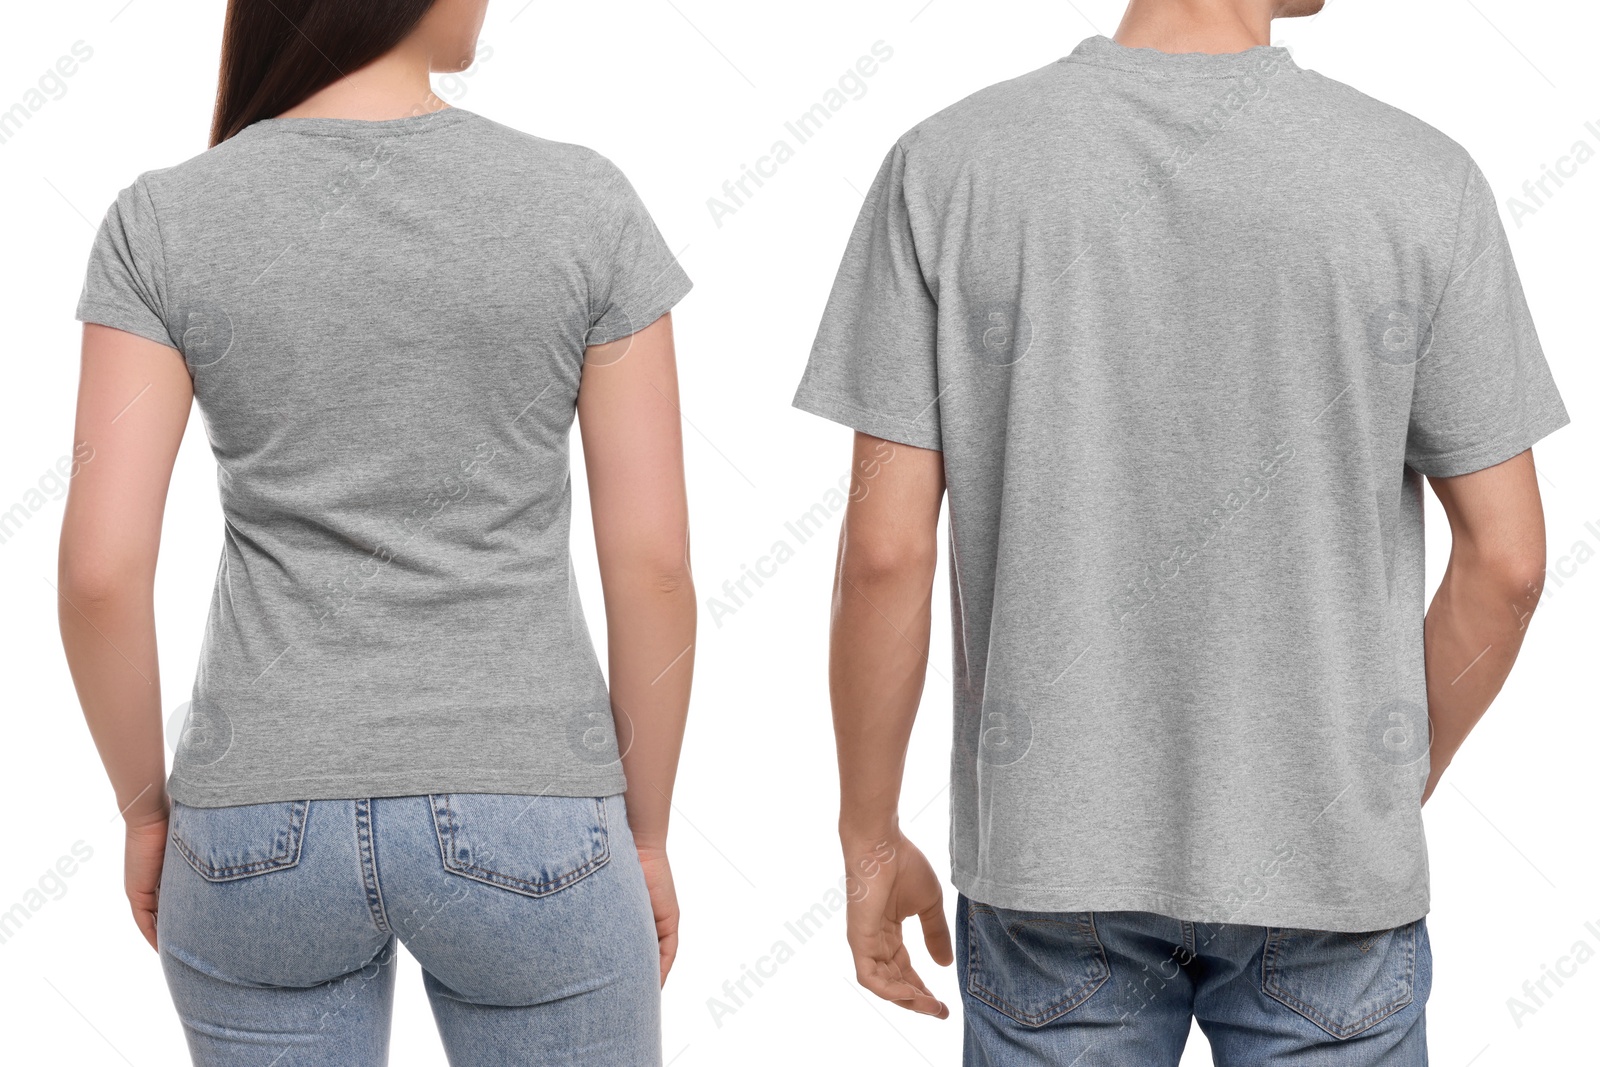 Image of People wearing grey t-shirts on white background, back view. Mockup for design